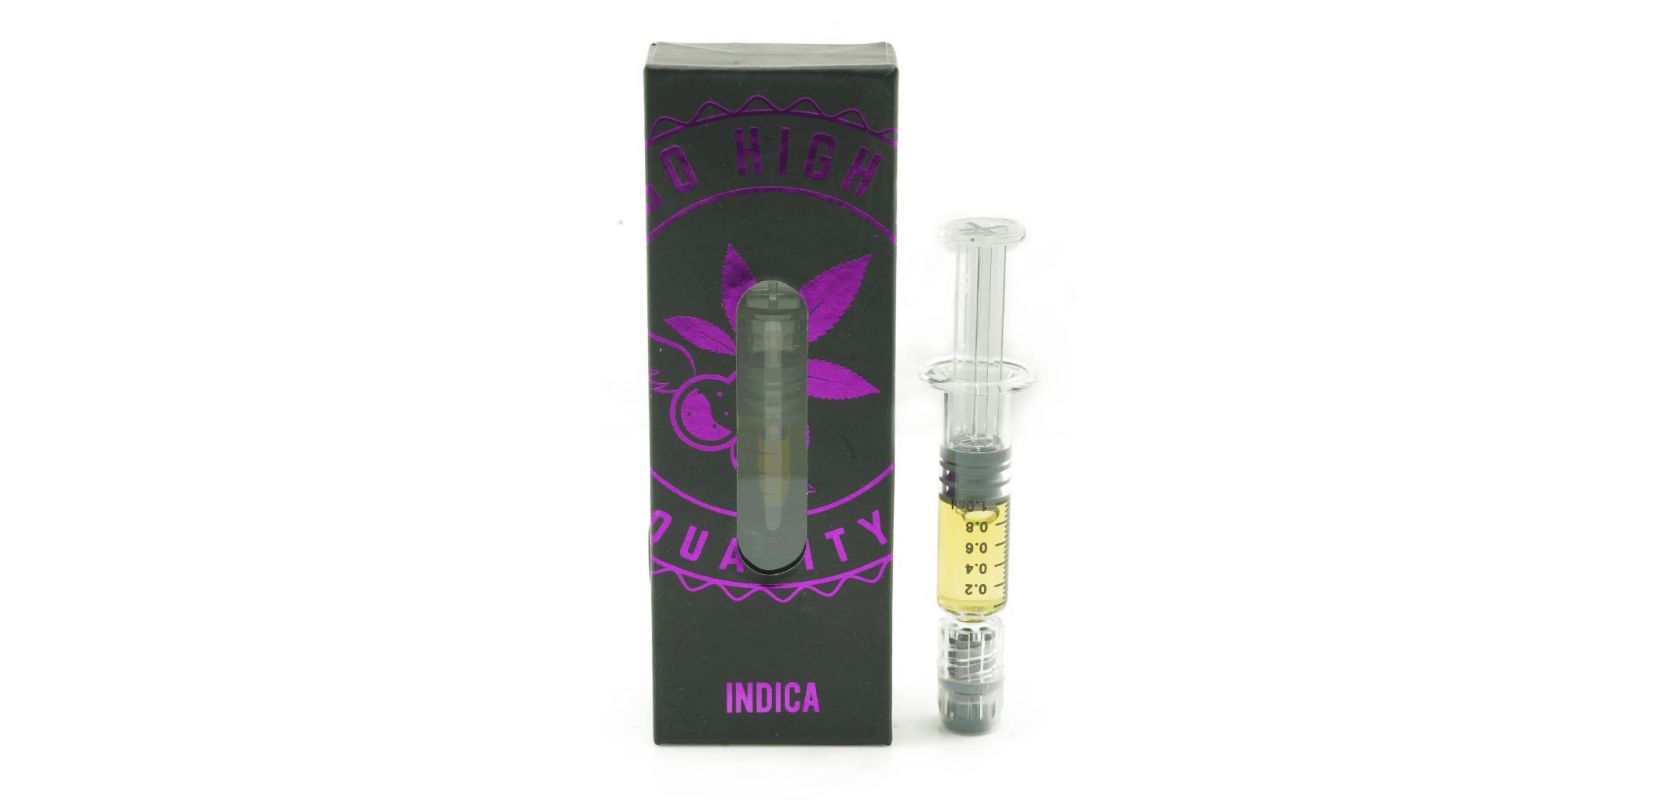 For consumers on the lookout for an effective THC distillate syringe to help manage stress, anxiety, and tension, the So High Premium Syringes – Gorilla Glue #4 (Indica) is a great option. 